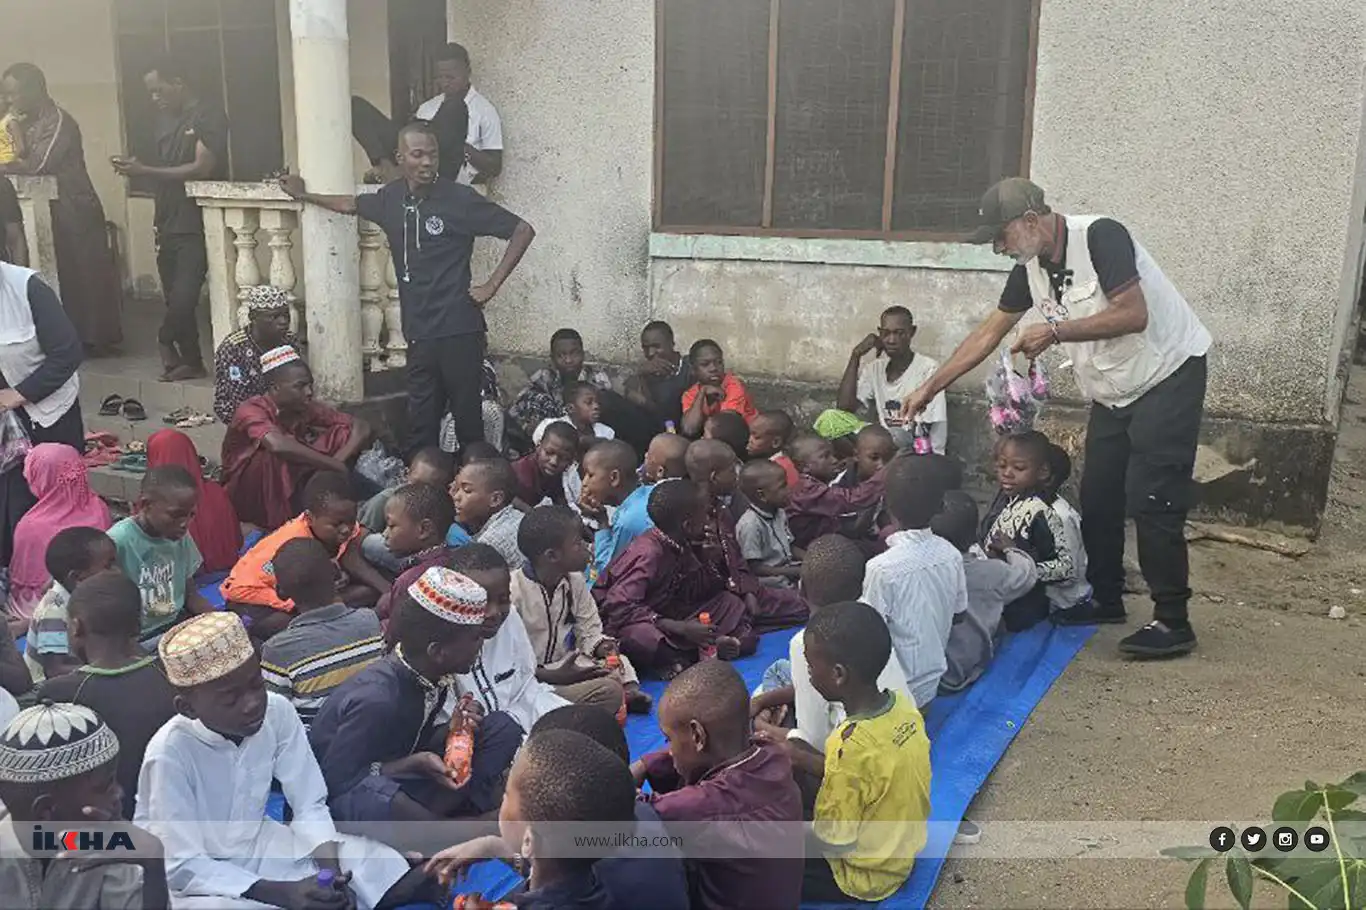 Orphans Foundation provides aid to students and orphan children in Tanzania